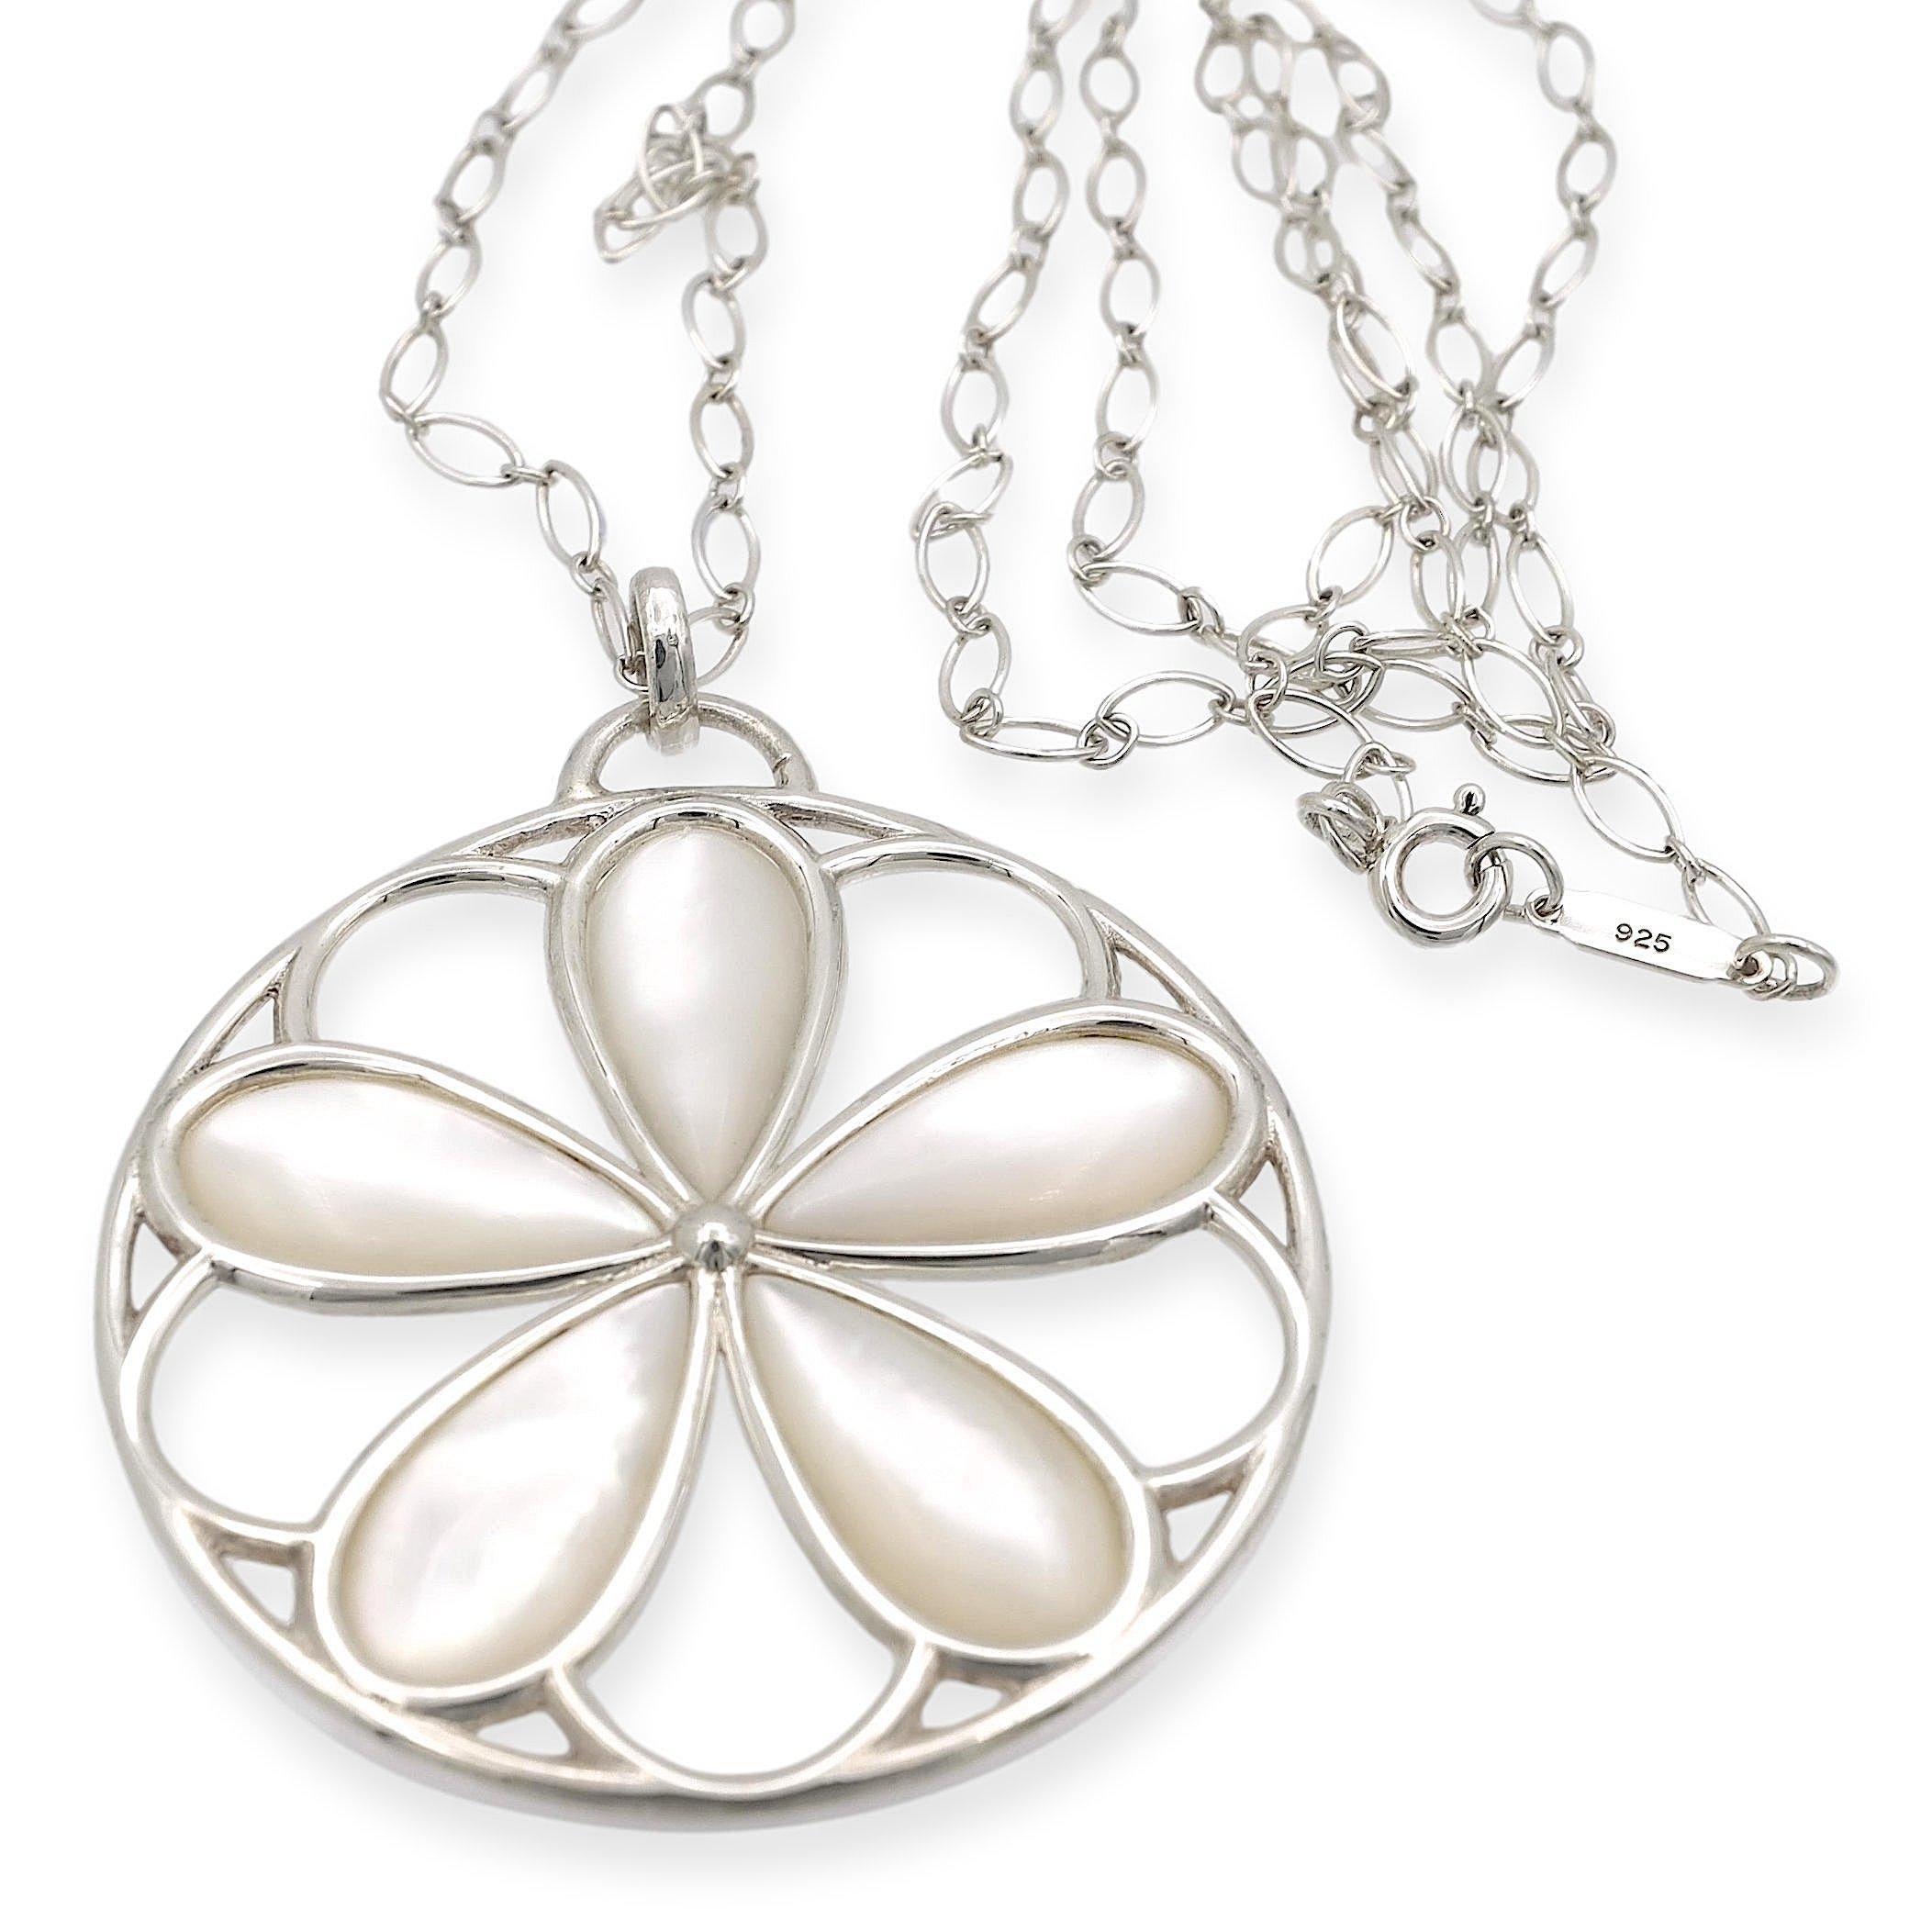 Tiffany & Co. pendant necklace finely crafted in sterling silver featuring an open scroll work daisy flower pendant delicately made with mother of pearl petals inside a round silver wire rim hanging off an oval link 24